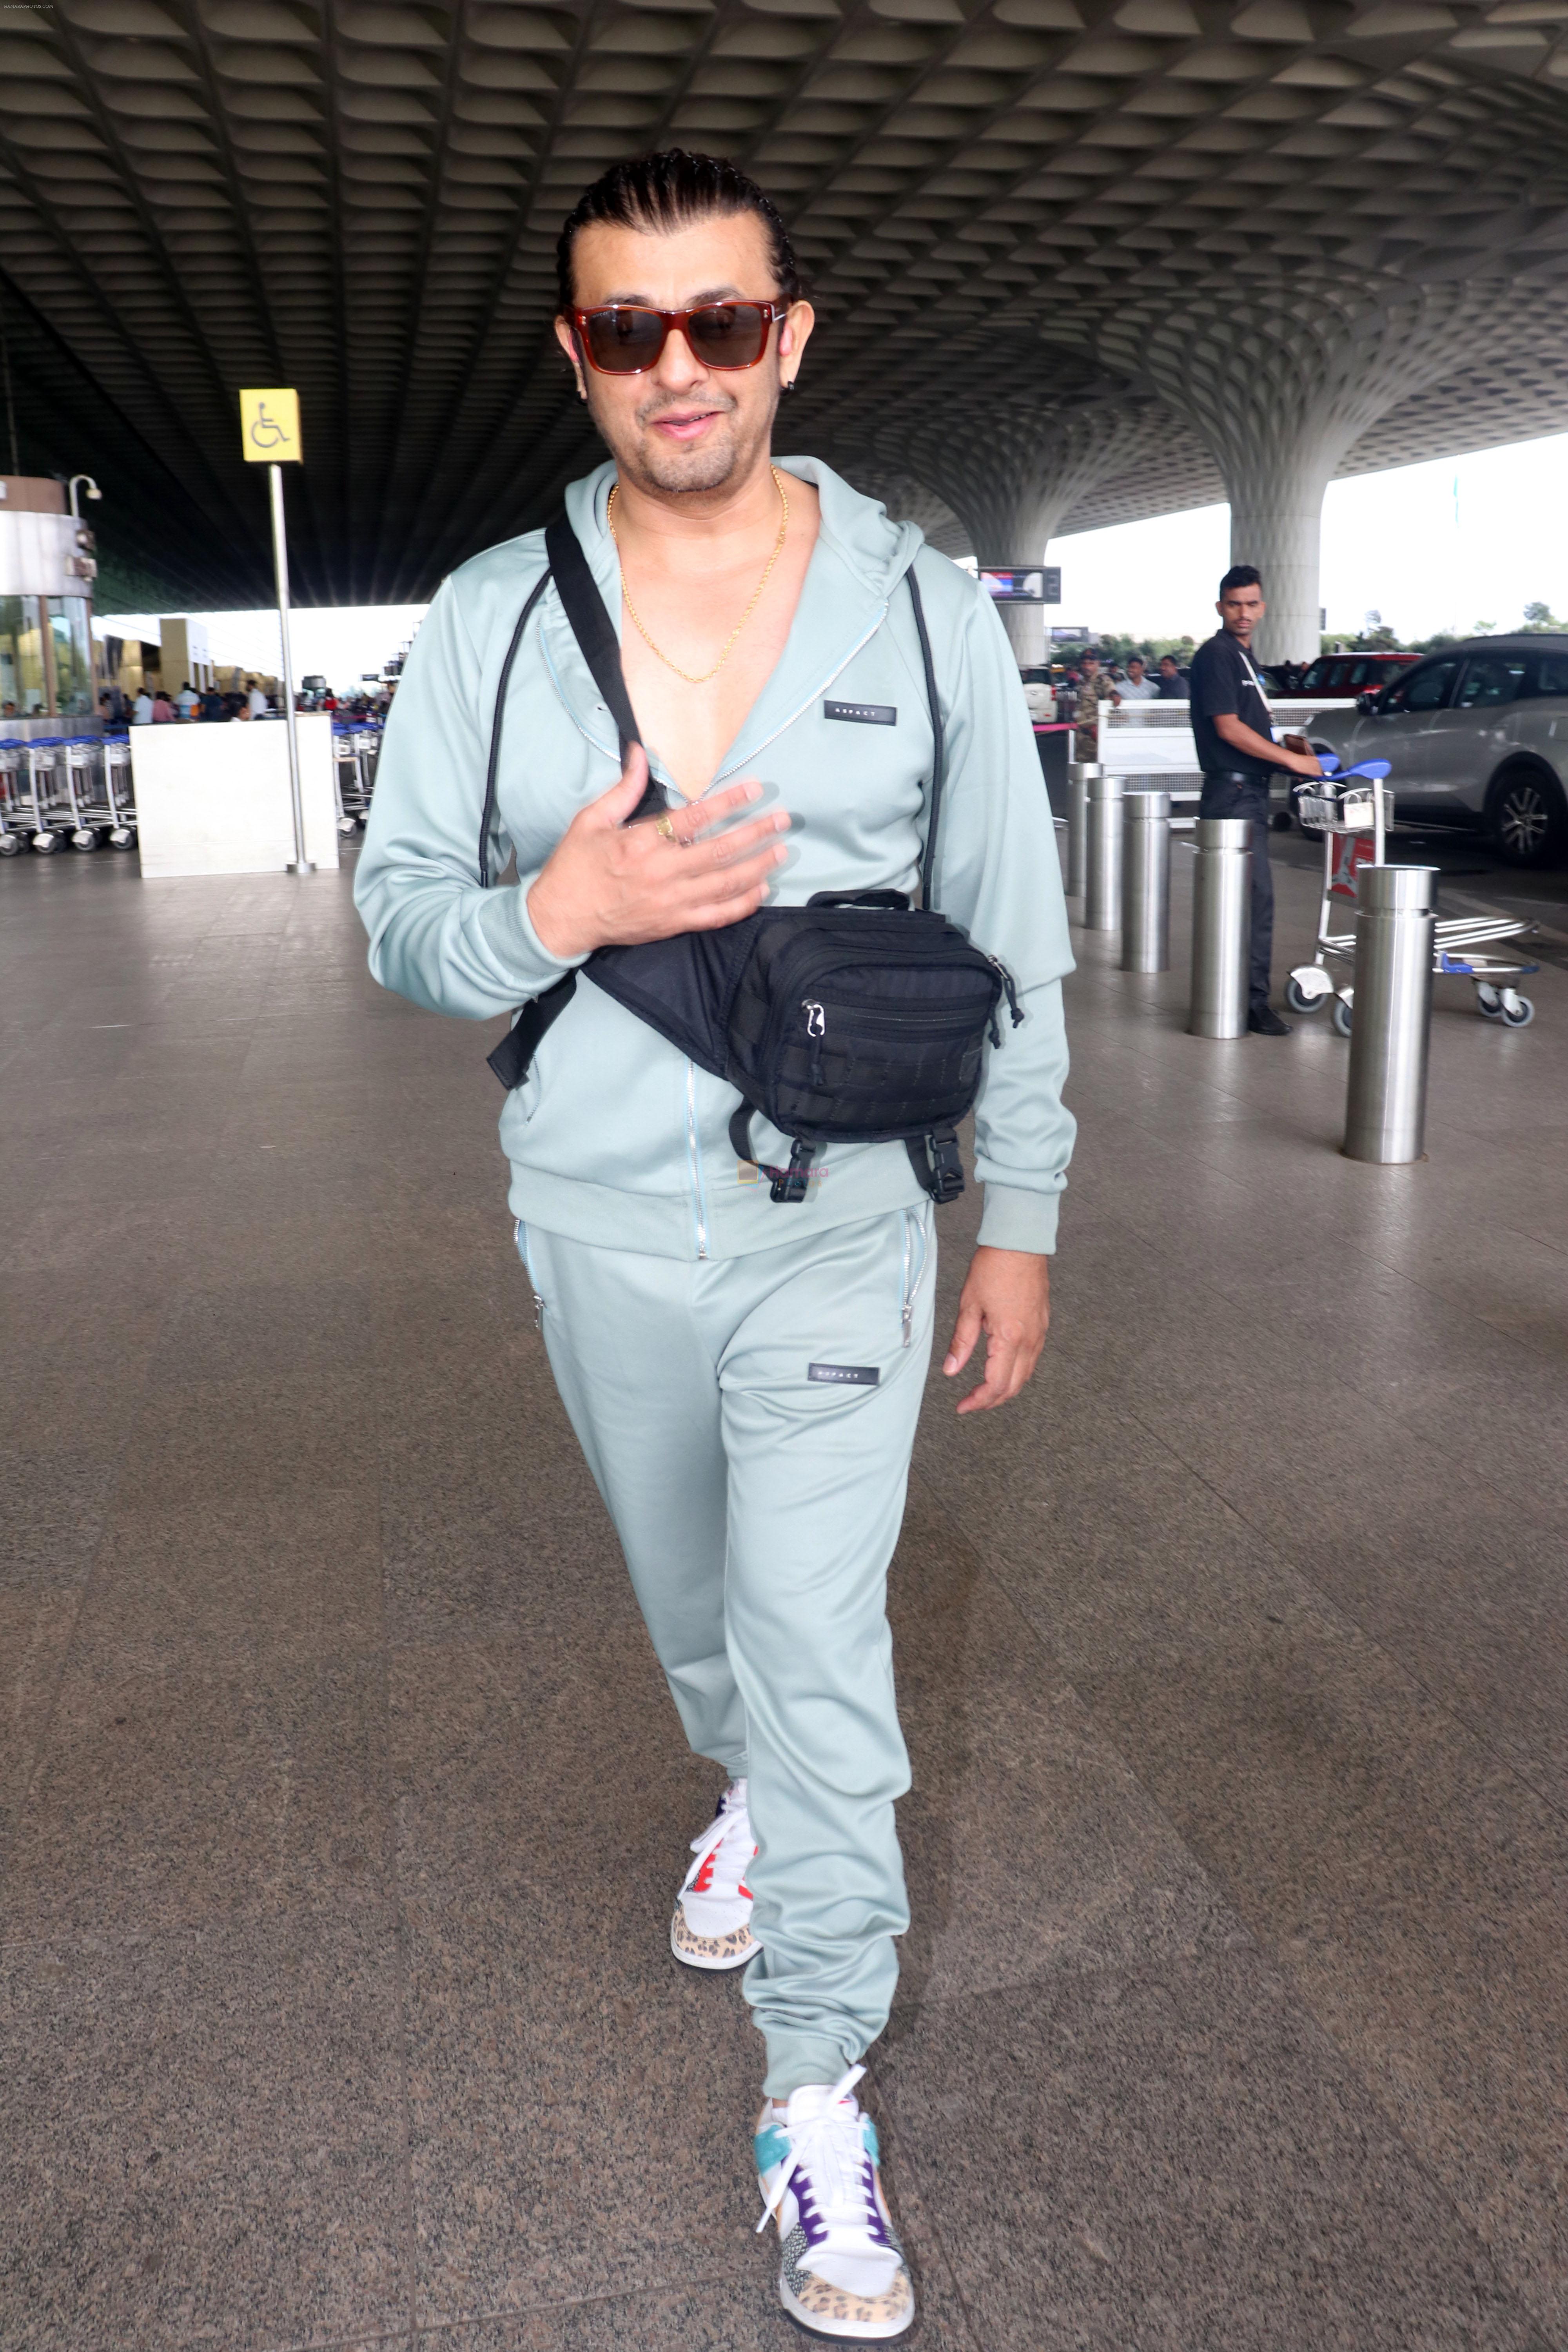 Sonu Nigam in sweat pant and jacket wearing sunglasses